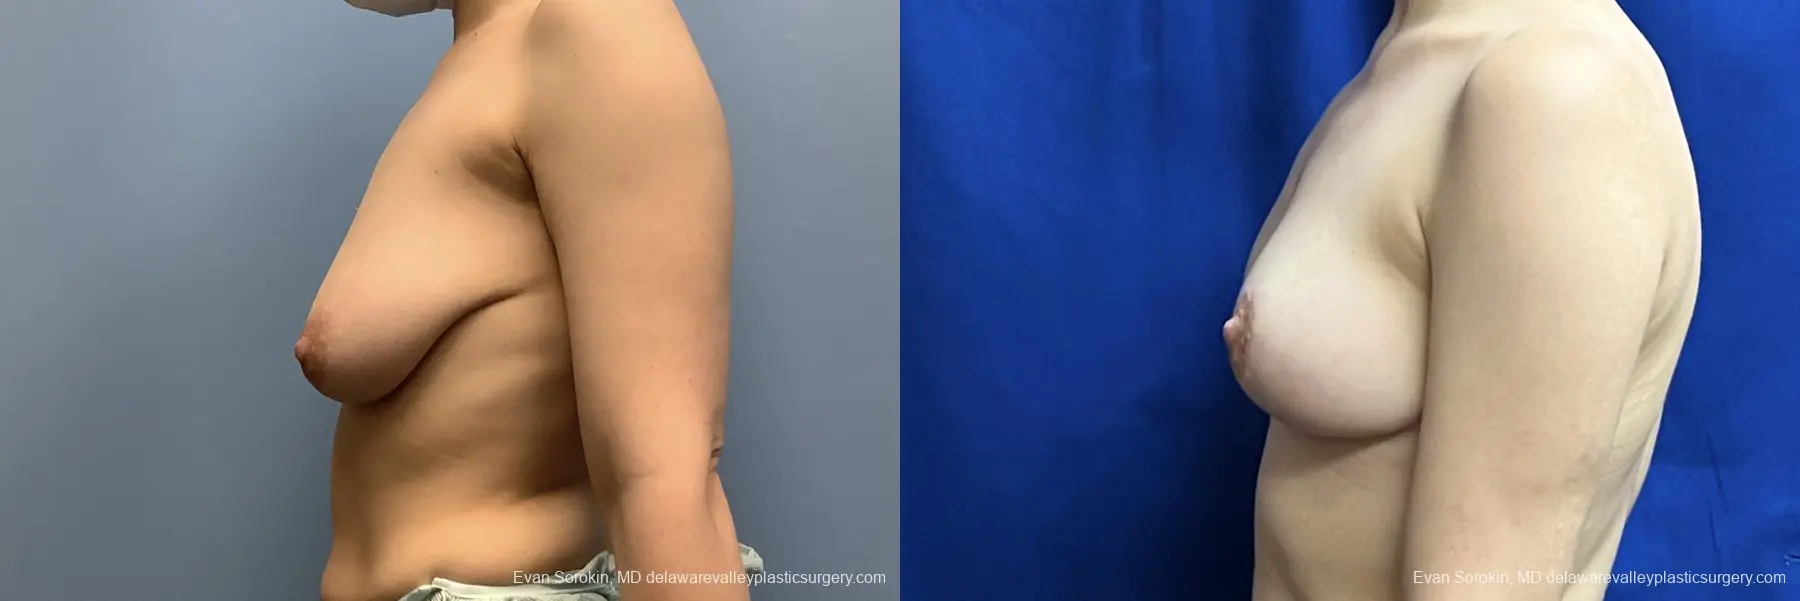 Breast Lift: Patient 3 - Before and After 5